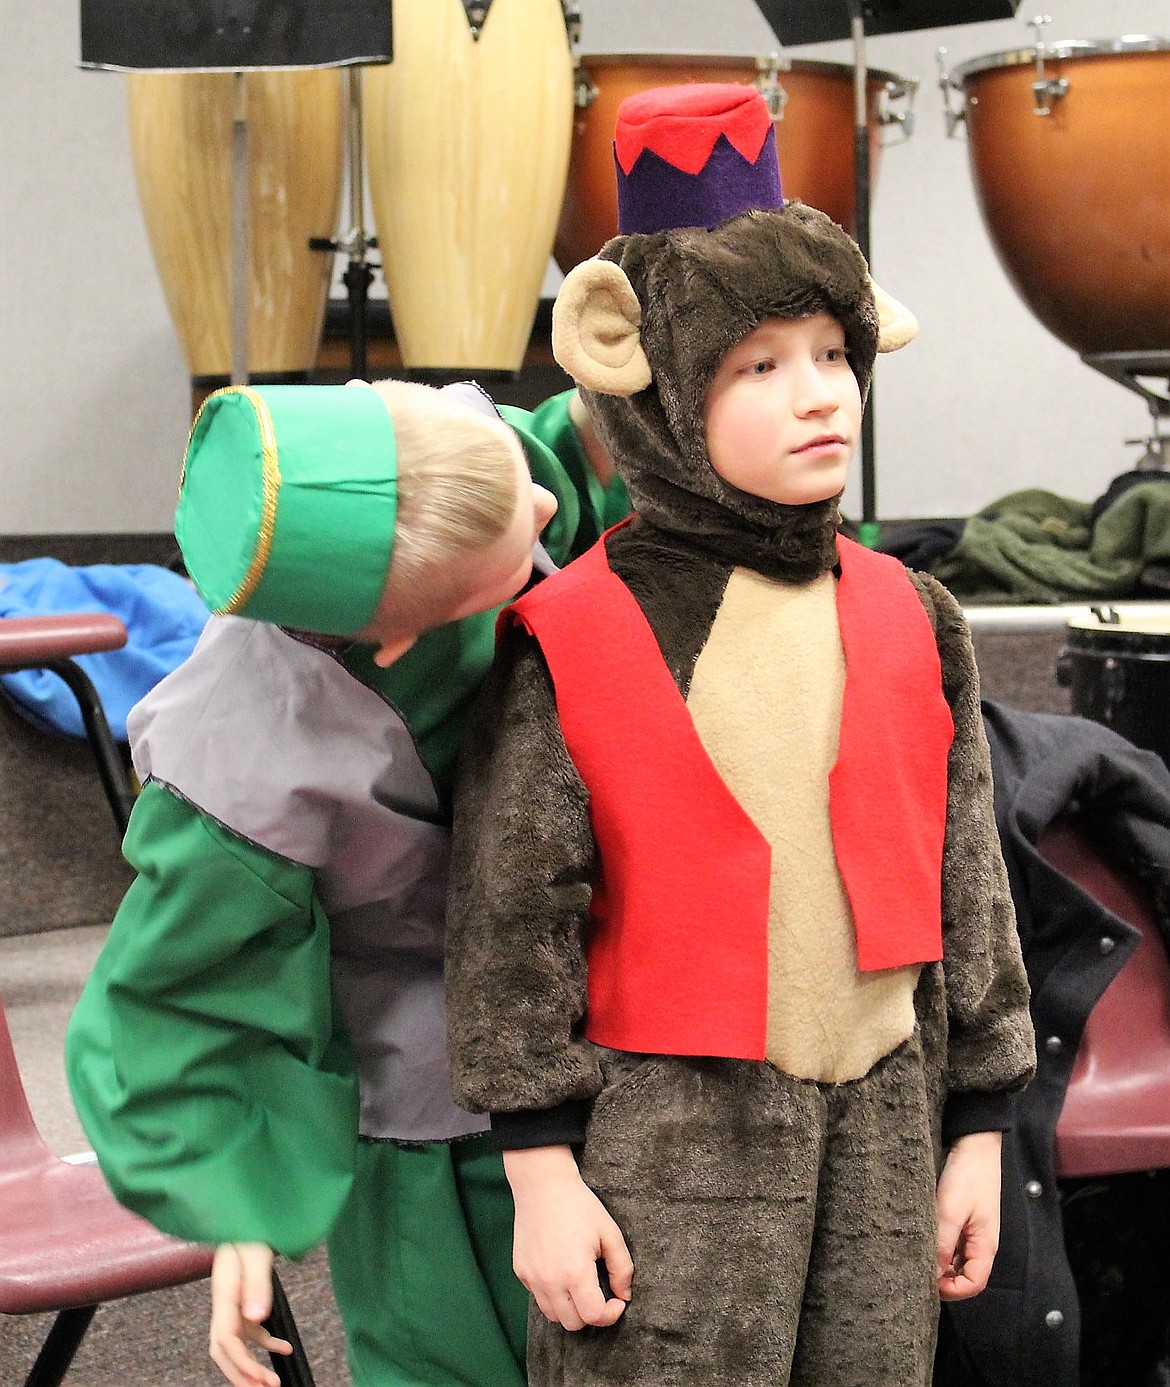 A friend whispers to Joseph Farris, who plays the monkey Abu, backstage before the play starts.